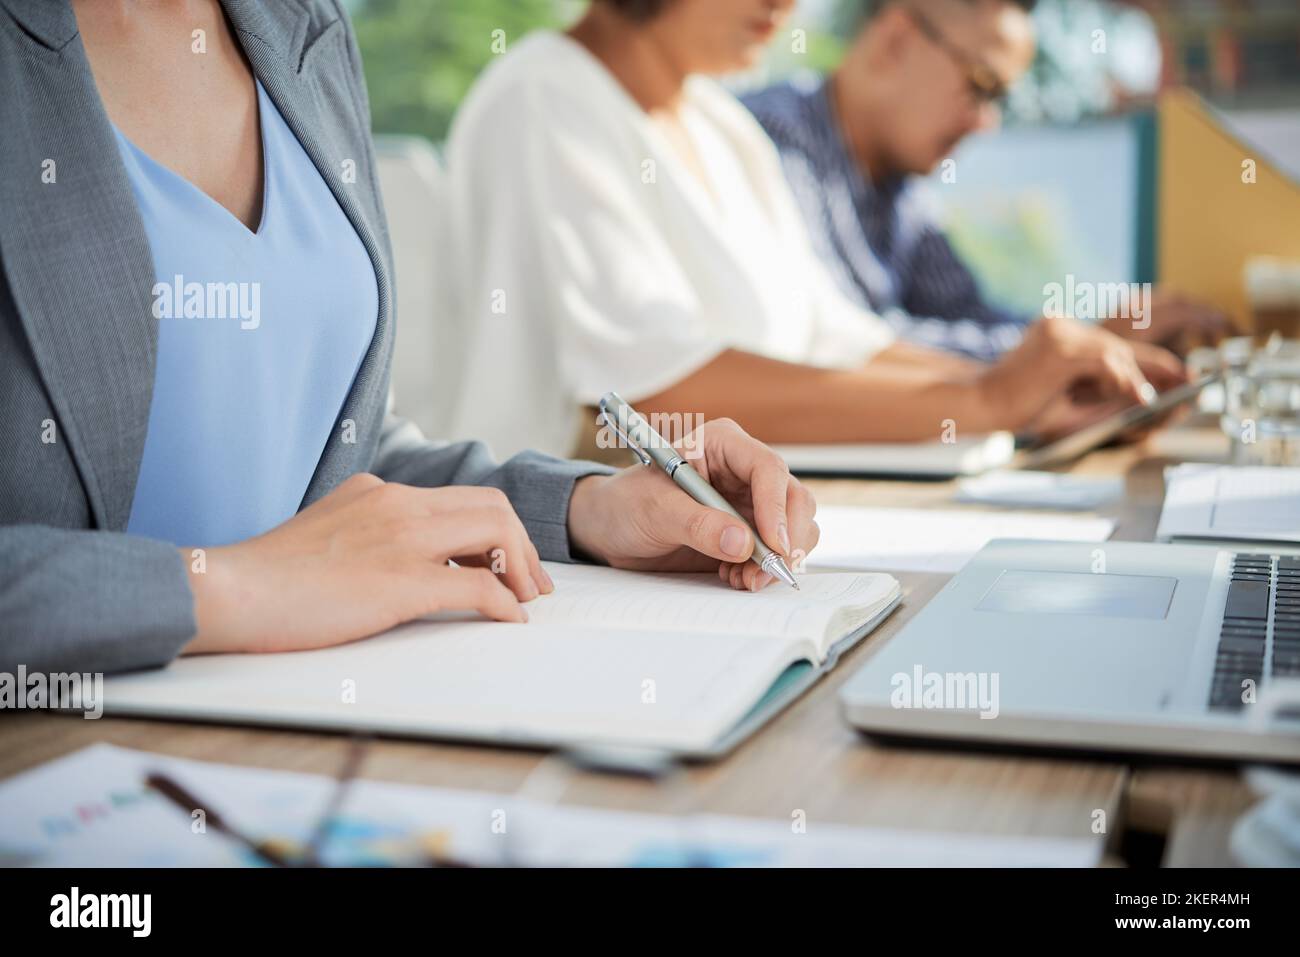 Cropped image of business lady writing her ideas in notepad Stock Photo